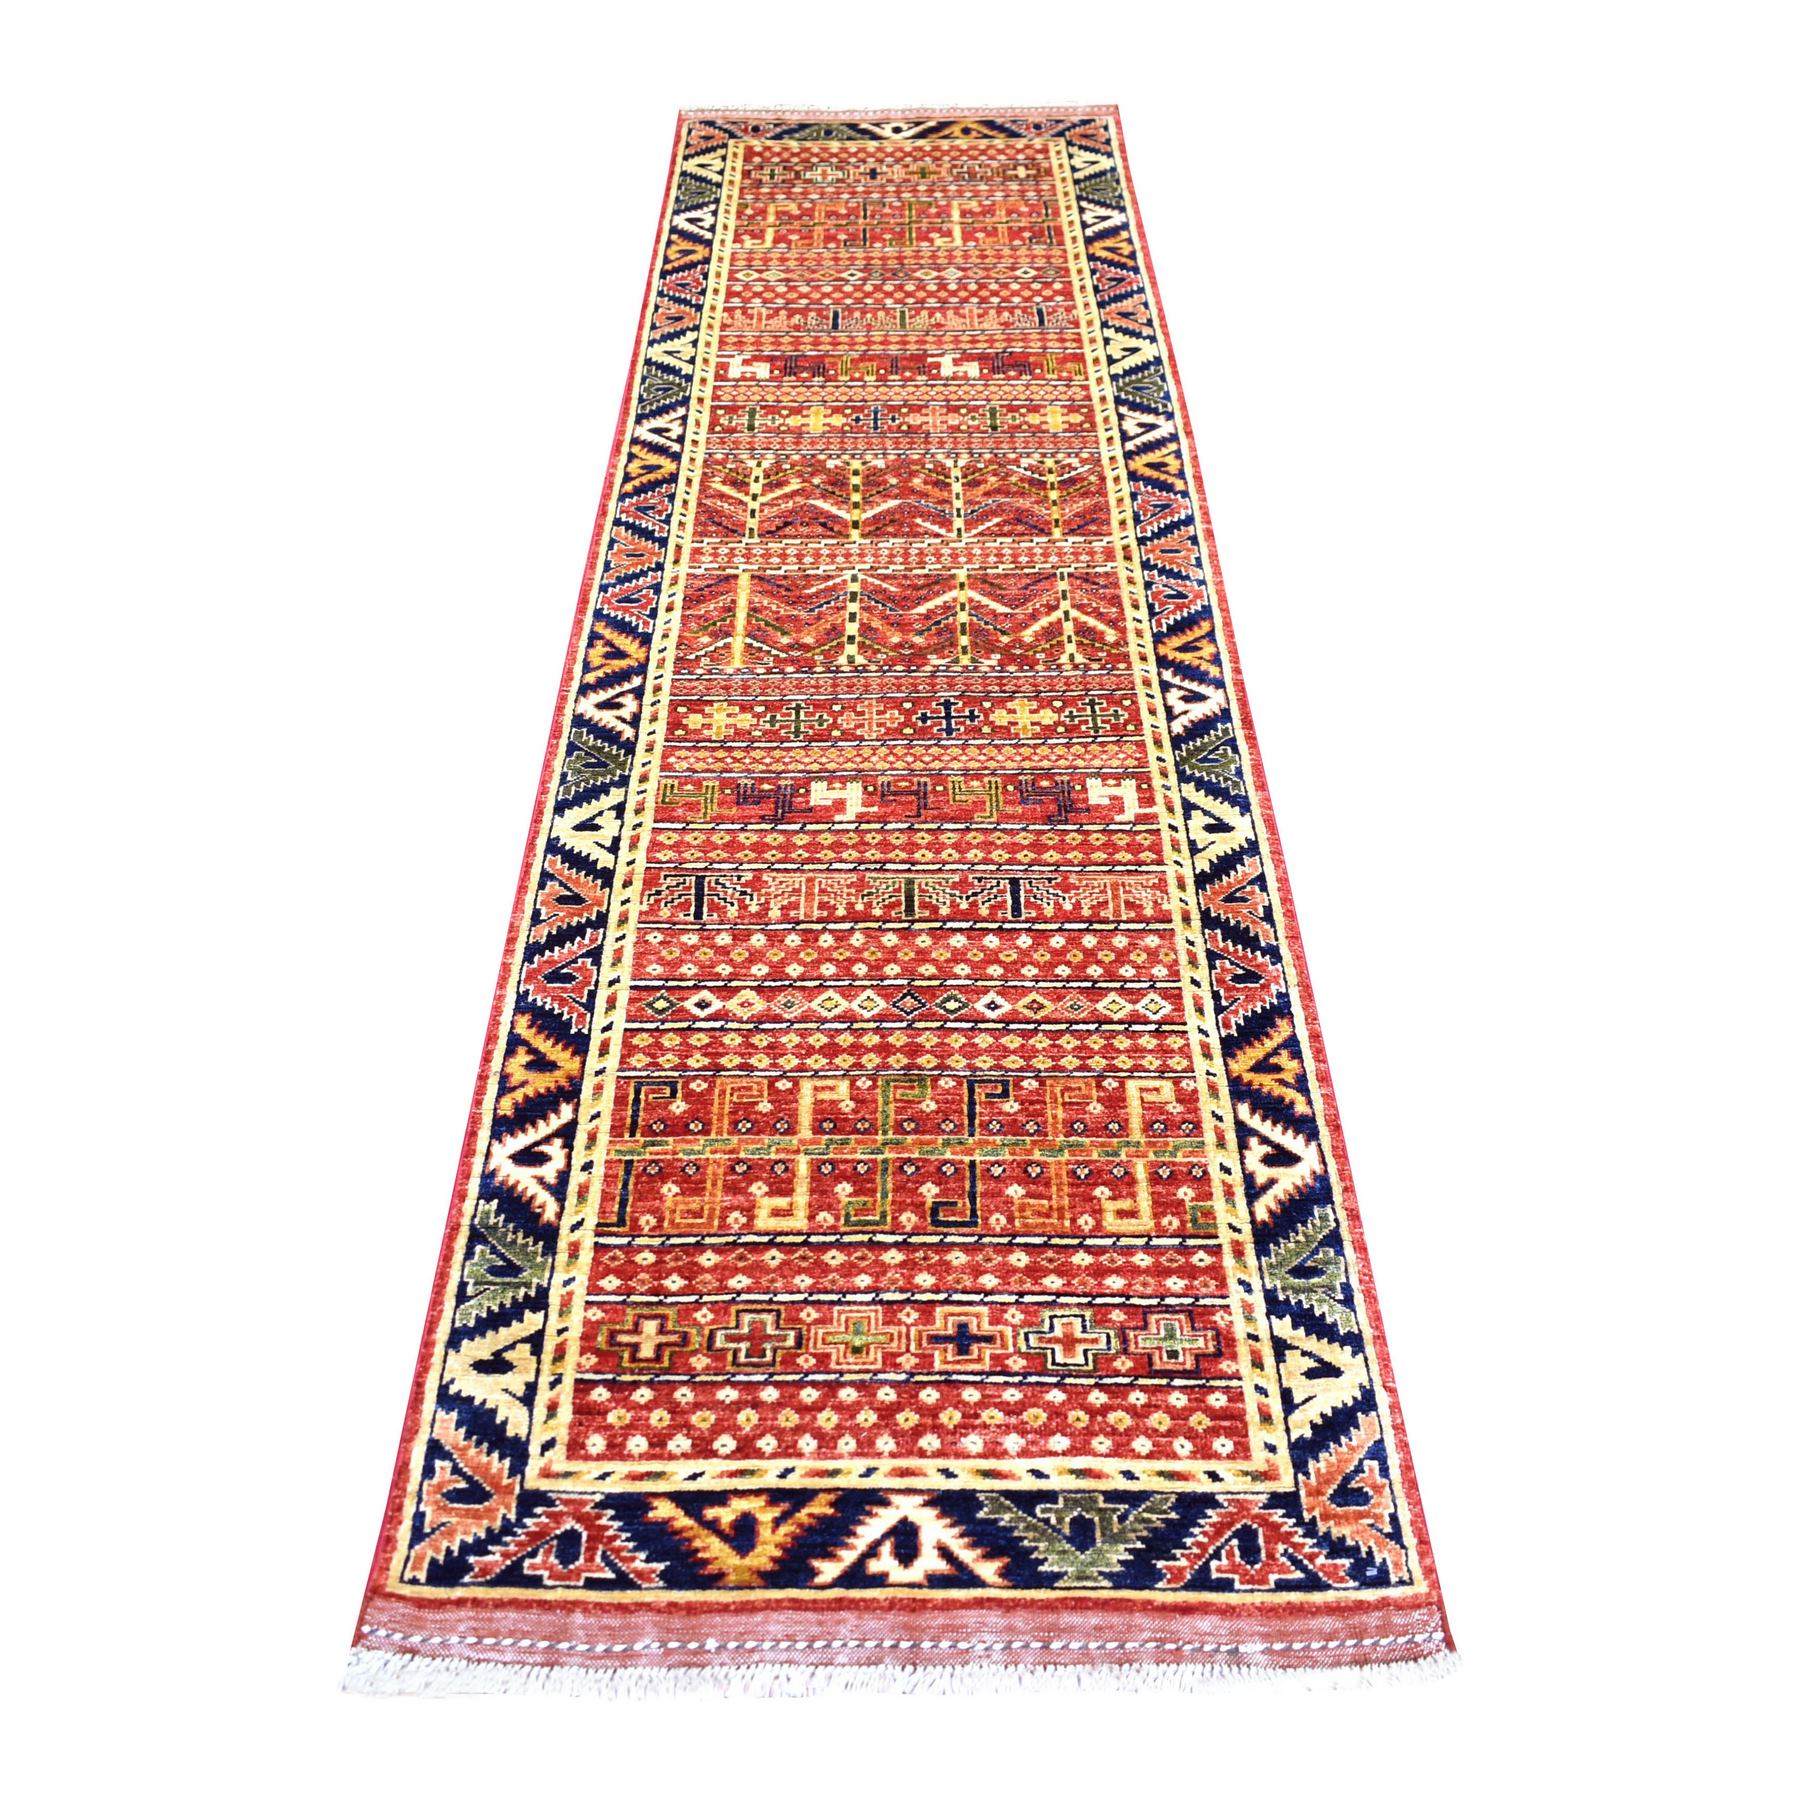 2'8"x9'7" Coral Red, Afghan Ersari with Bijar Garus Design, Ancient Animal Figurines, Natural Dyes, Densely Woven, Extra Soft Wool, Hand Woven, Runner Oriental Rug 